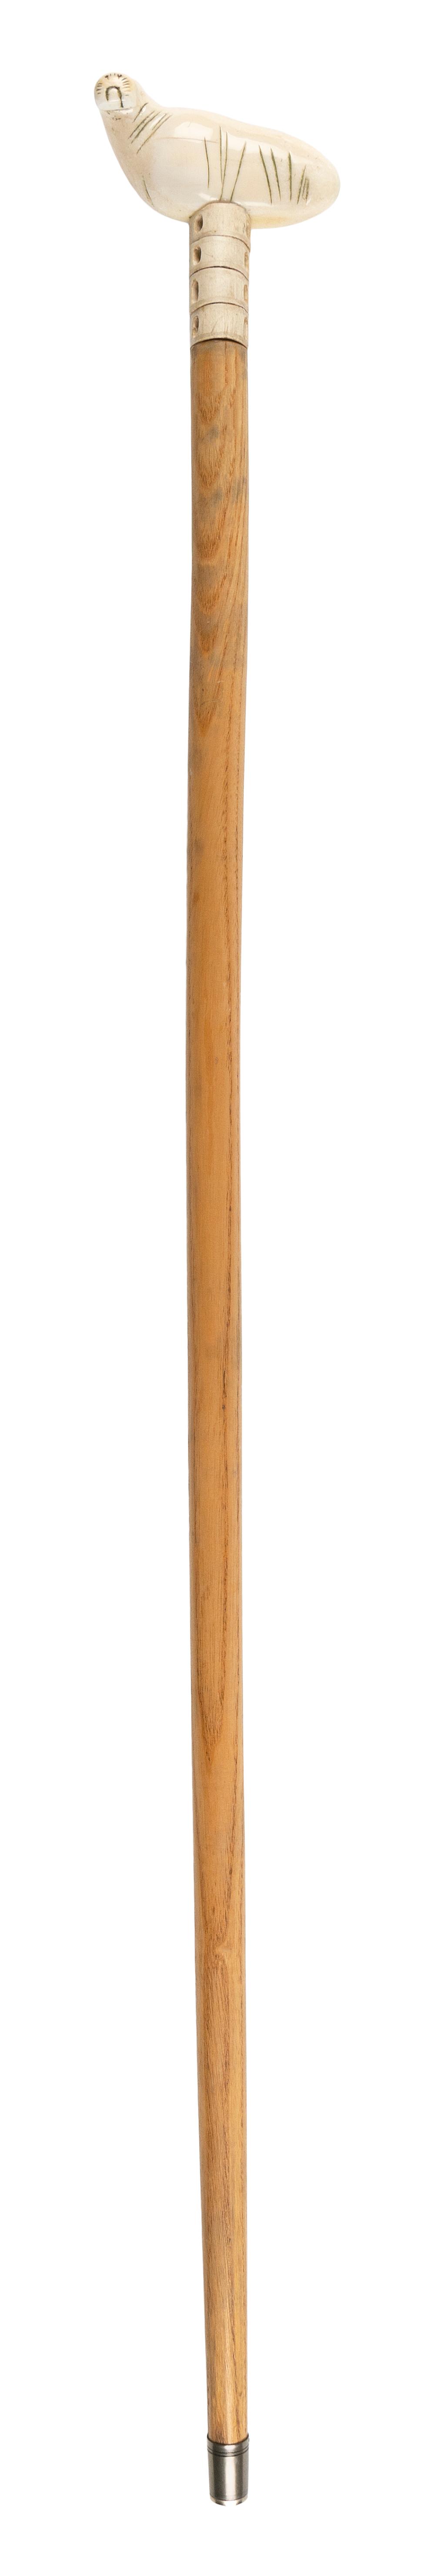 WALKING STICK WITH WALRUS-FORM